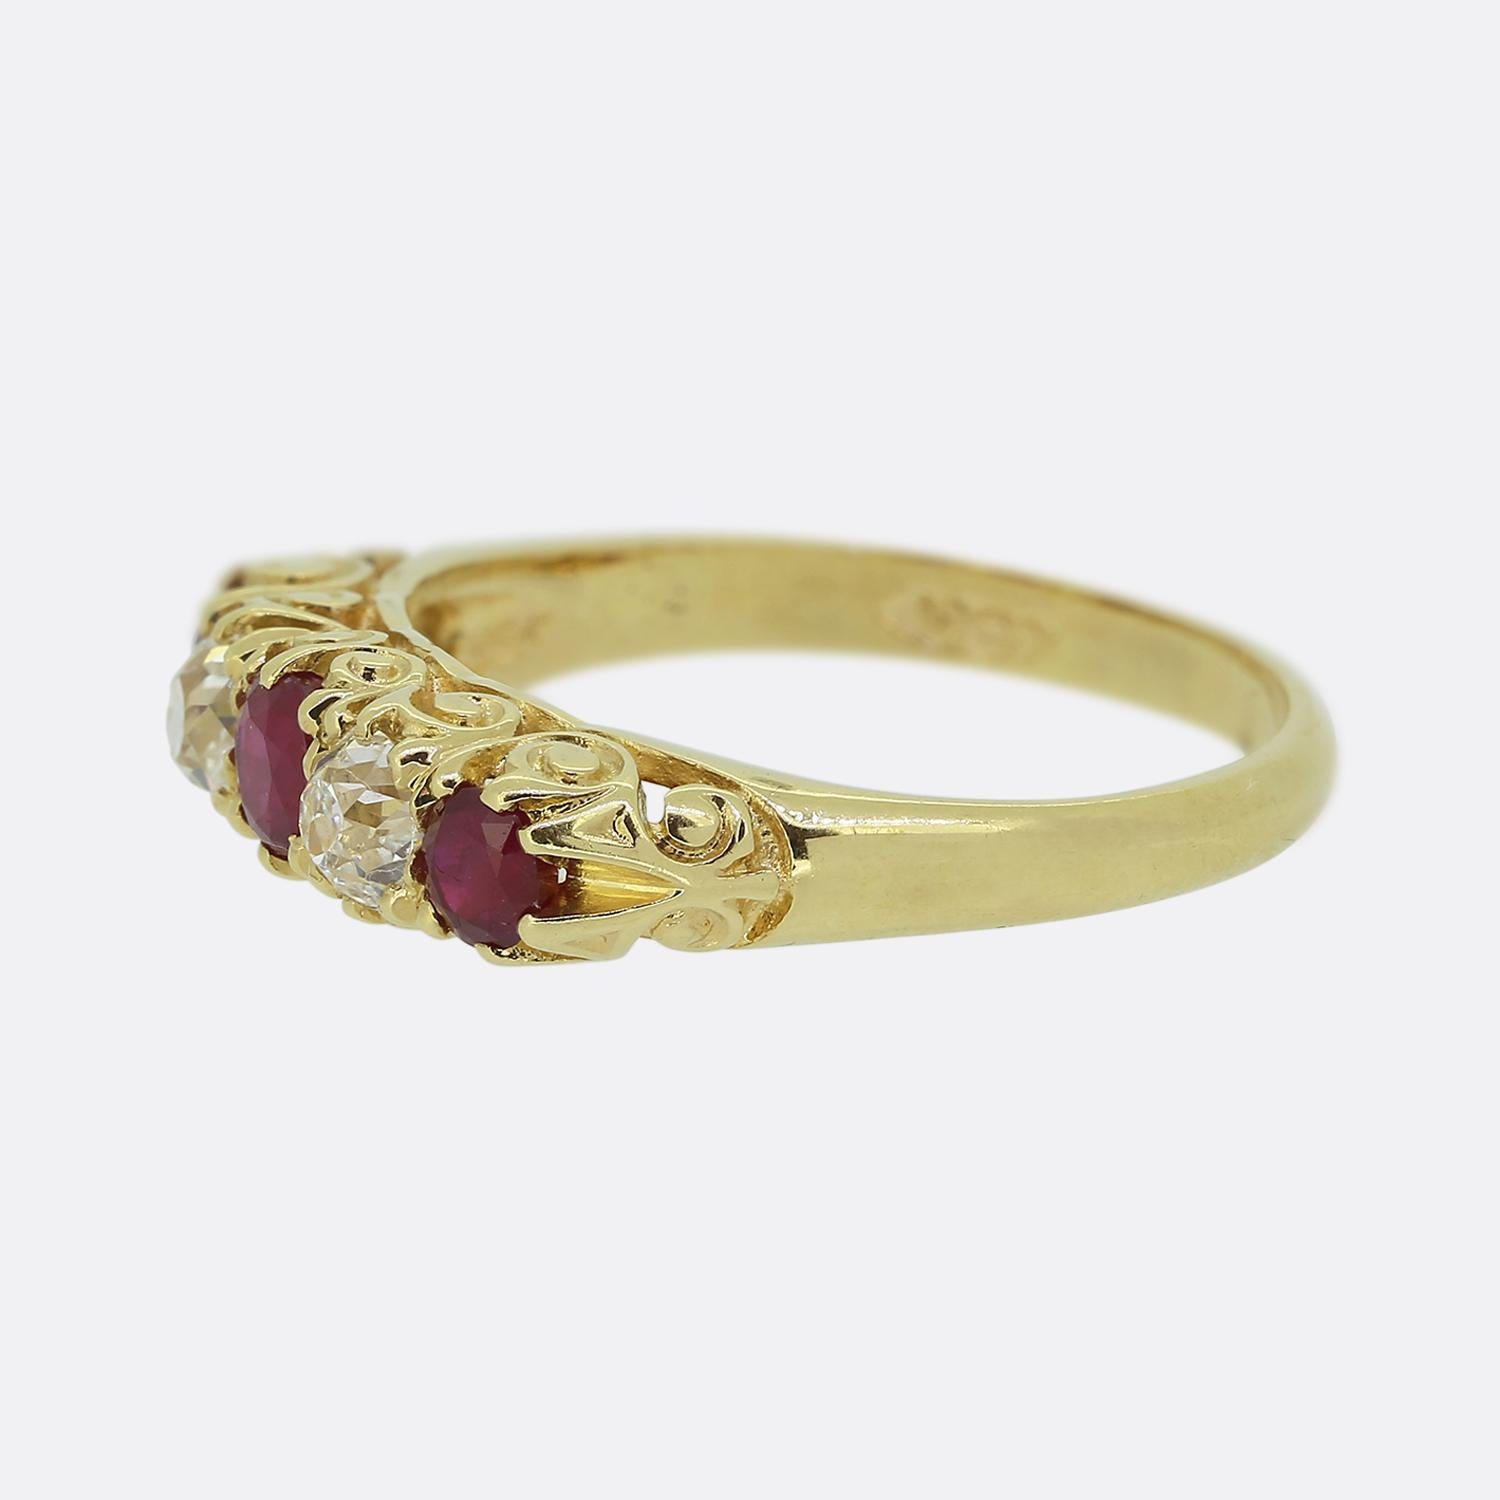 Here we have a classically style five-stone ring dating back to the Victorian period. This antique piece has been crafted from a rich 18ct yellow gold and features a trio of round faceted rich red rubies in a single line across of the face; each of